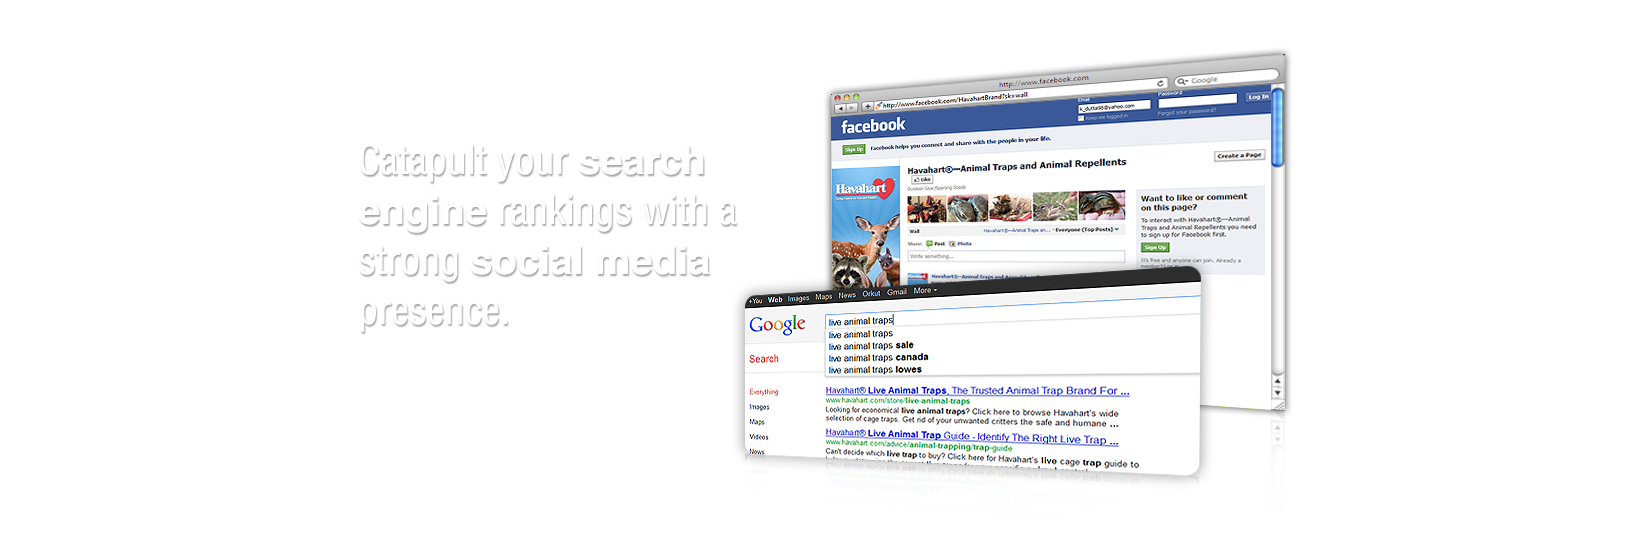 Catapult your Search Engine Rankings with a strong Social Media Presence.